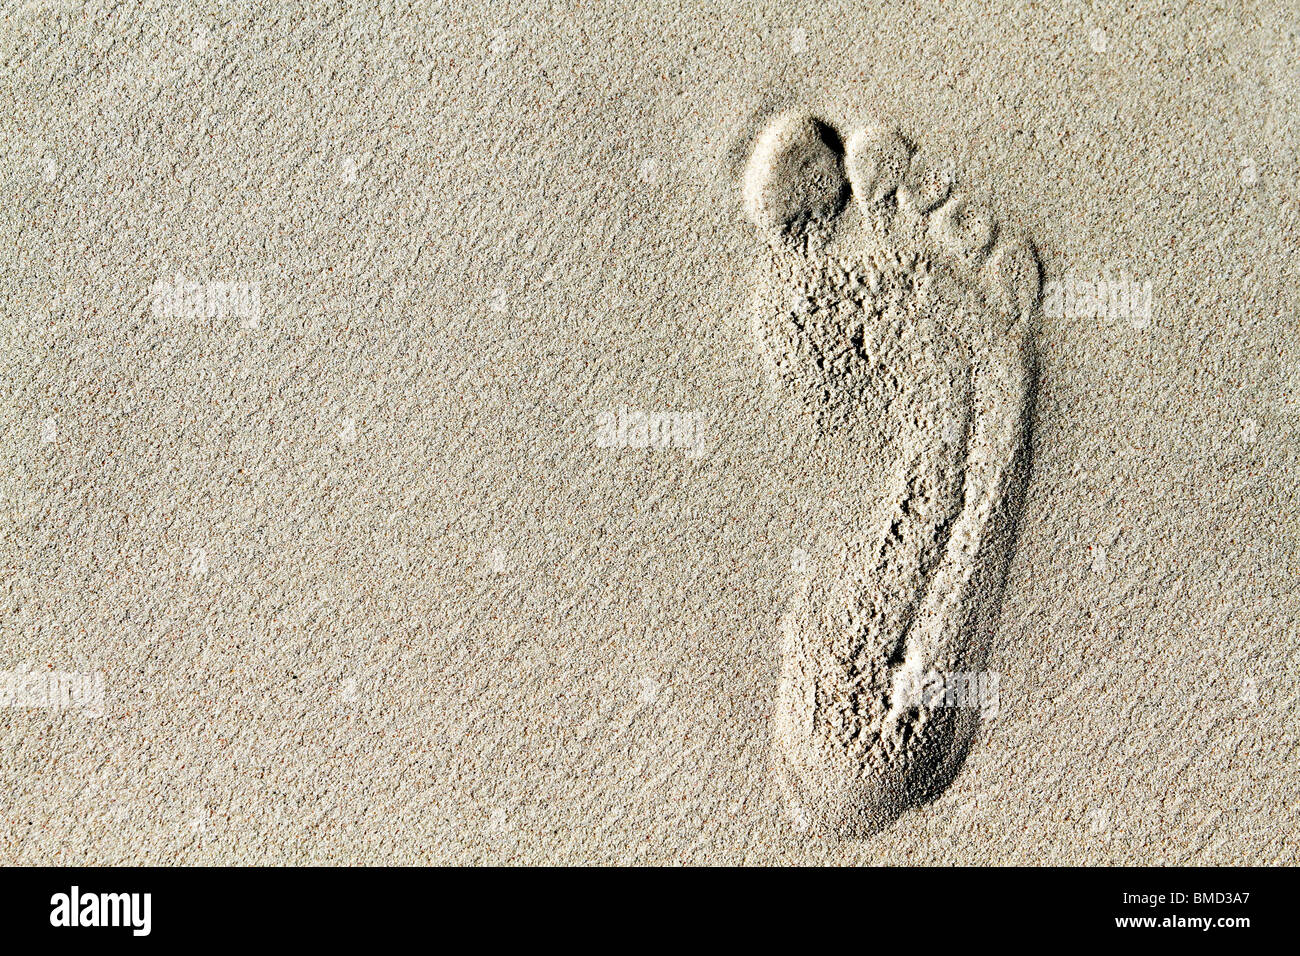 Footprint in the sand at Boracay, Philippines Stock Photo